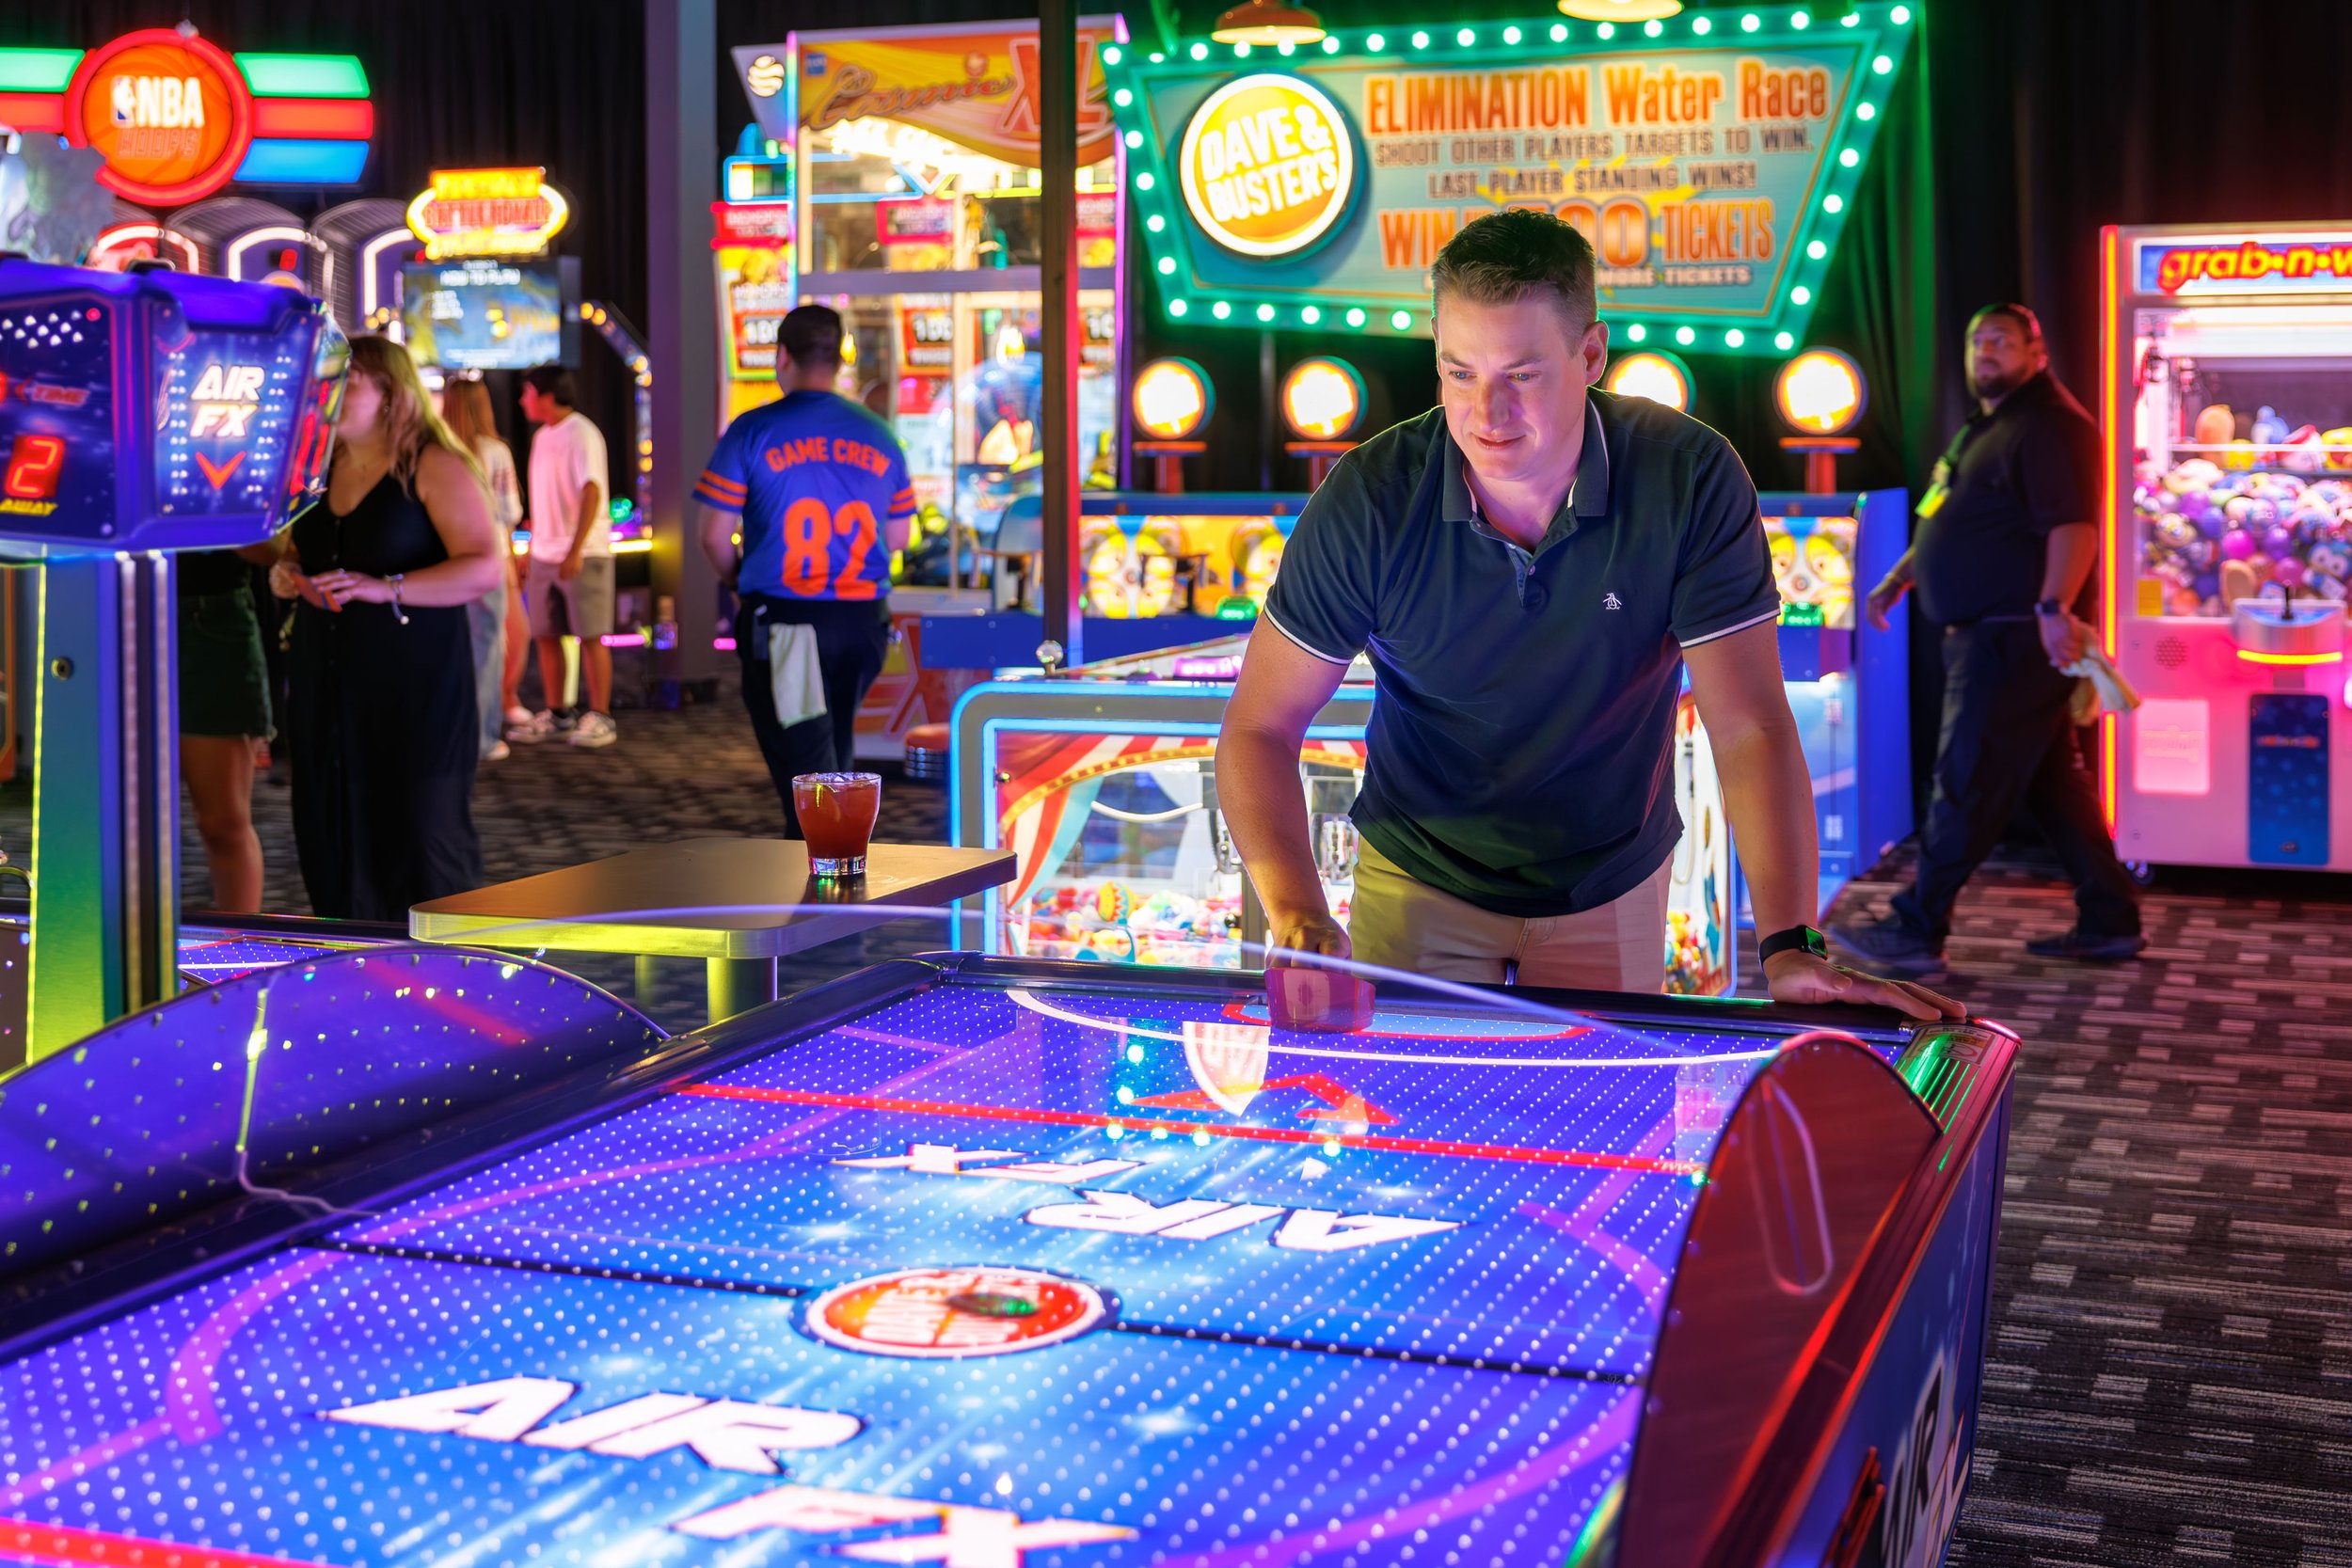 Dave & Buster's Rancho Mirage opening with flag search, prizes